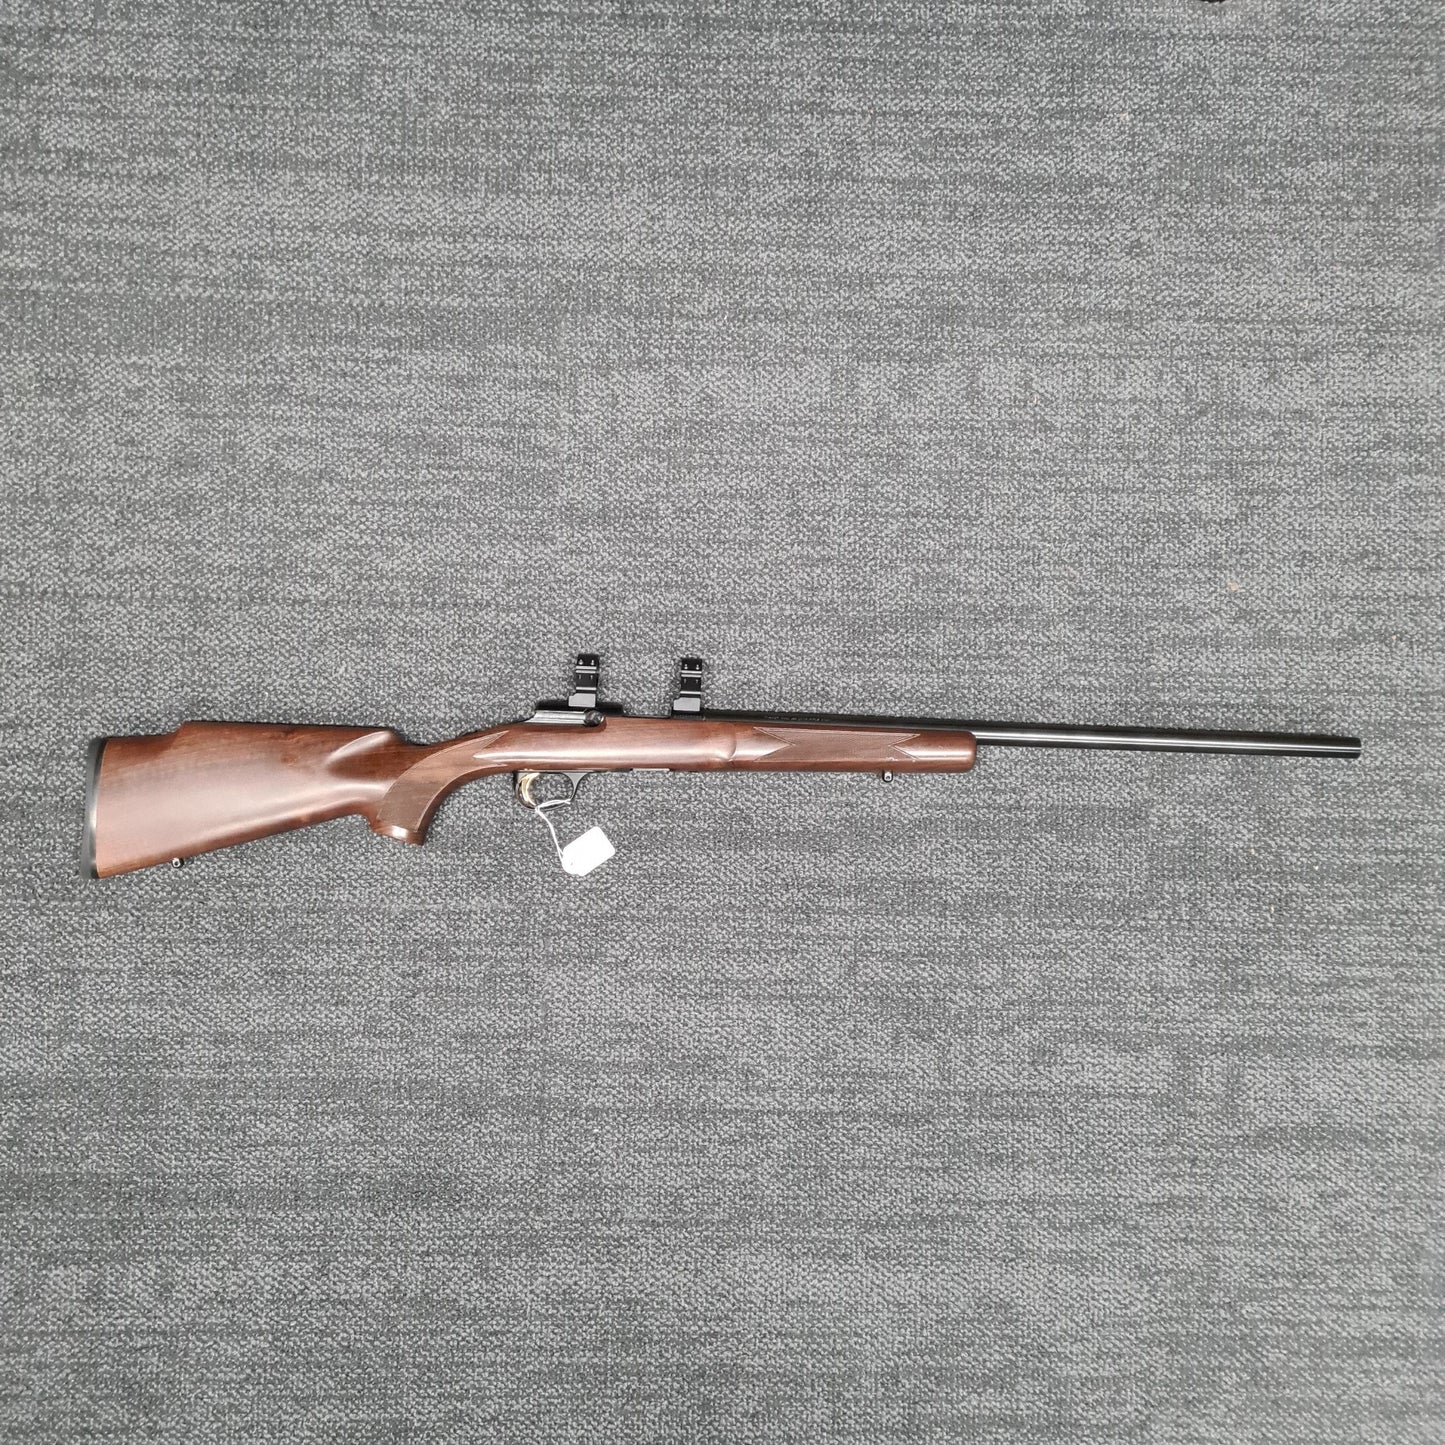 Second Hand Browning T Bolt .22lr Rifle Sn 20228MP253